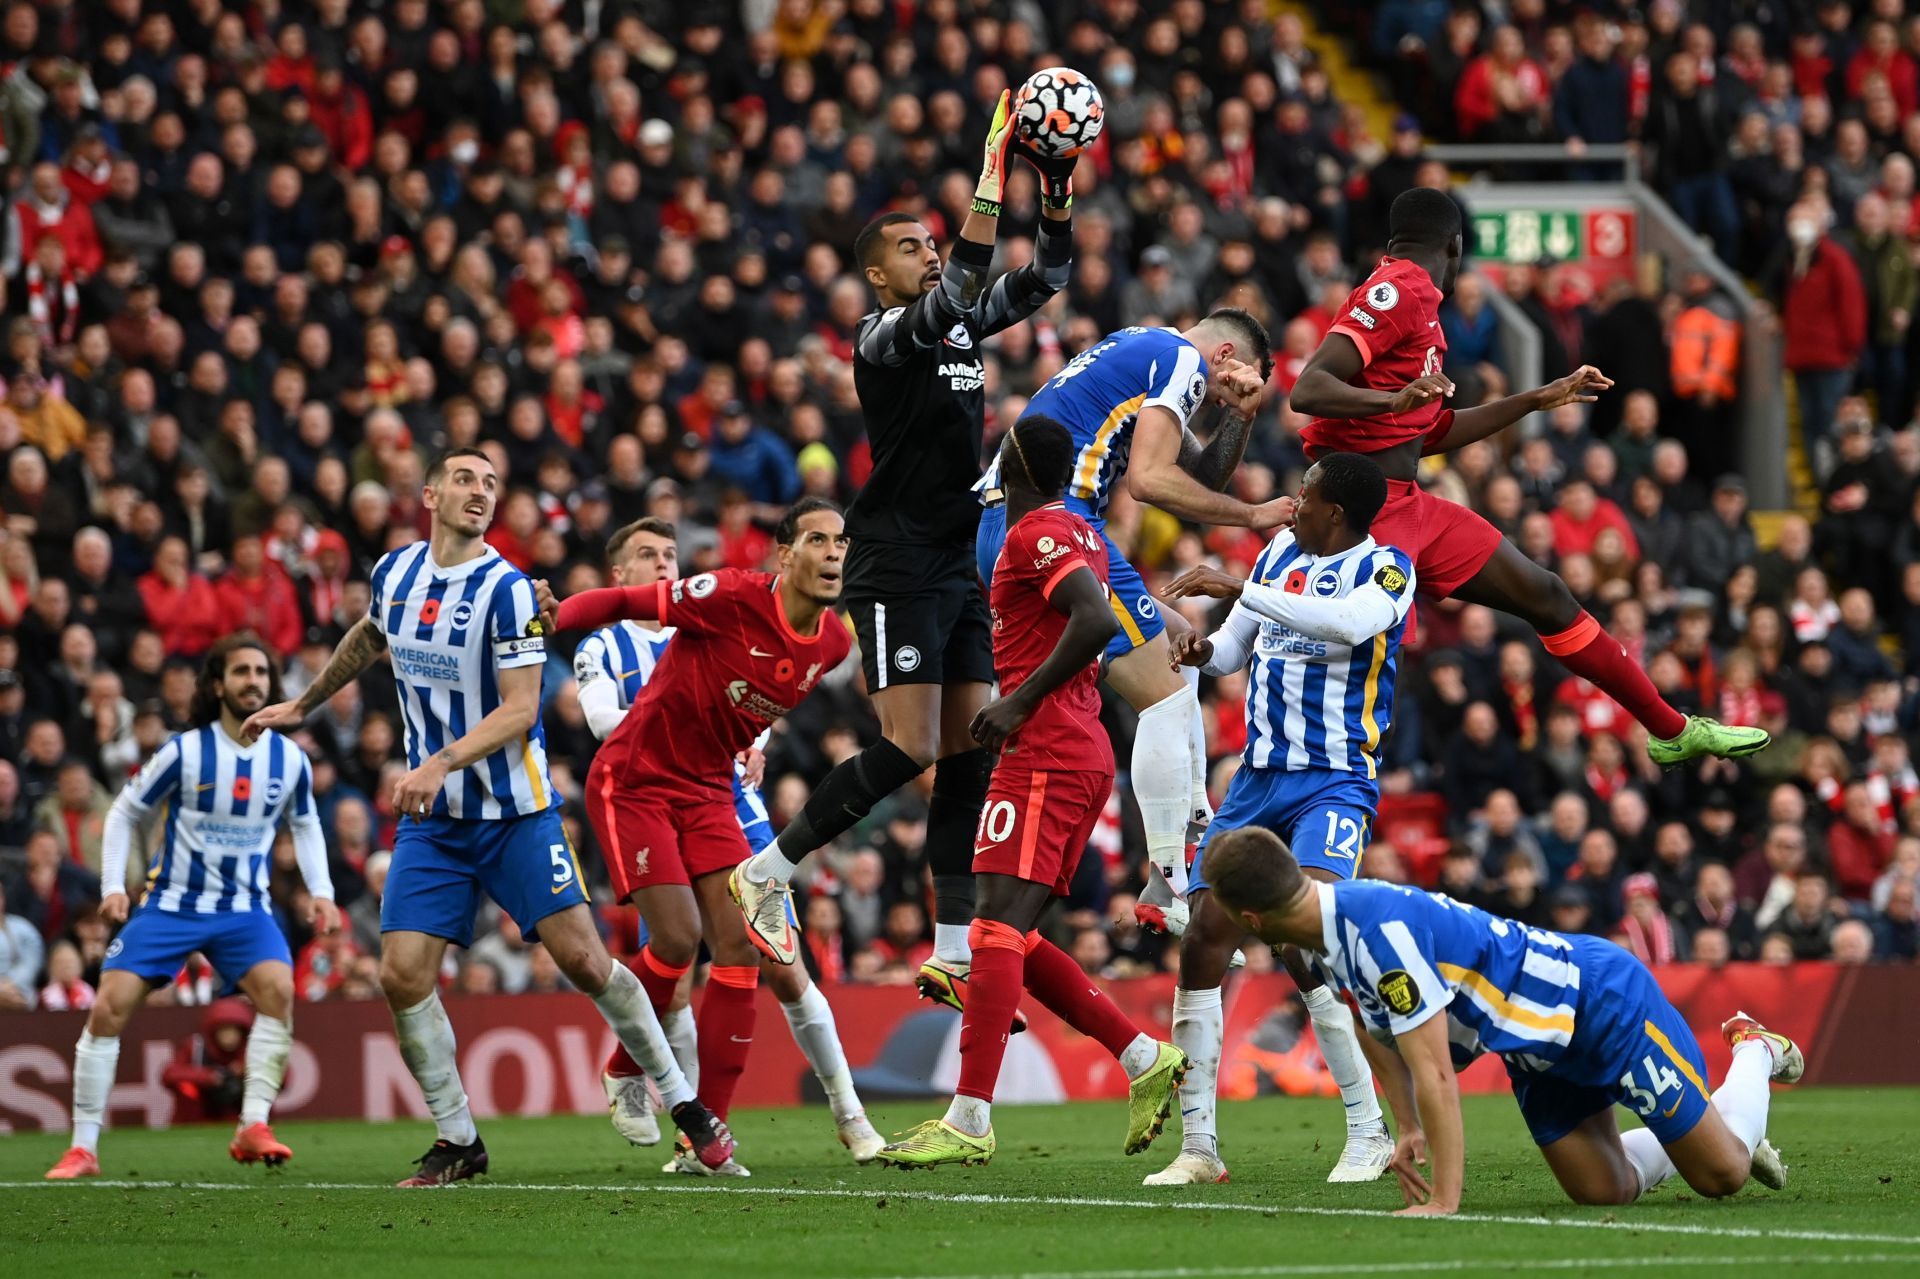 Liverpool and Brighton &amp; Hove Albion played out an entertaining 2-2 draw